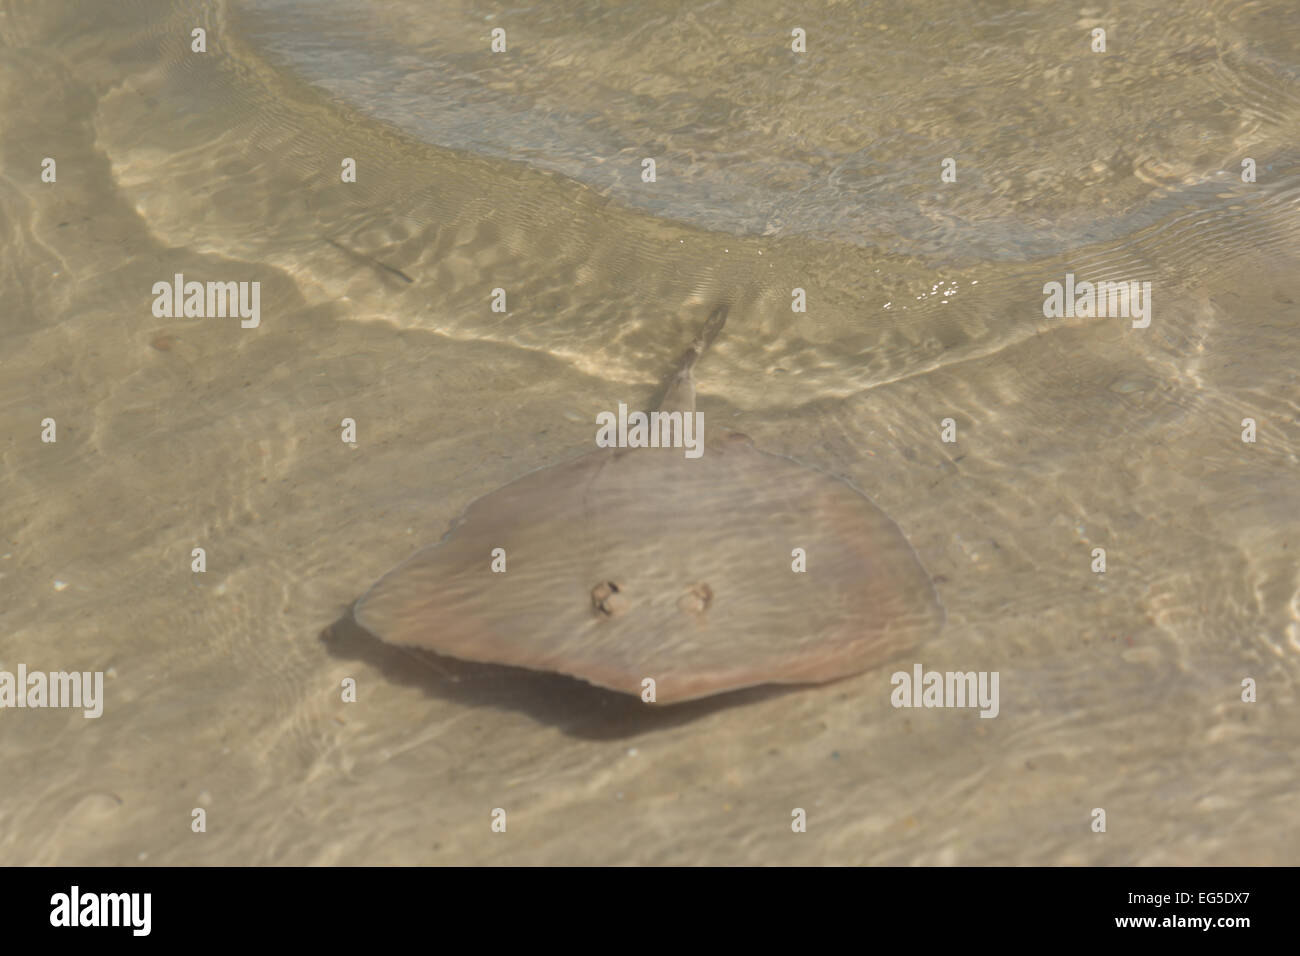 A photograph of a Common Stingaree in Lake Macquarie, NSW, Australia. The common stingaree is a species of stingray. Stock Photo